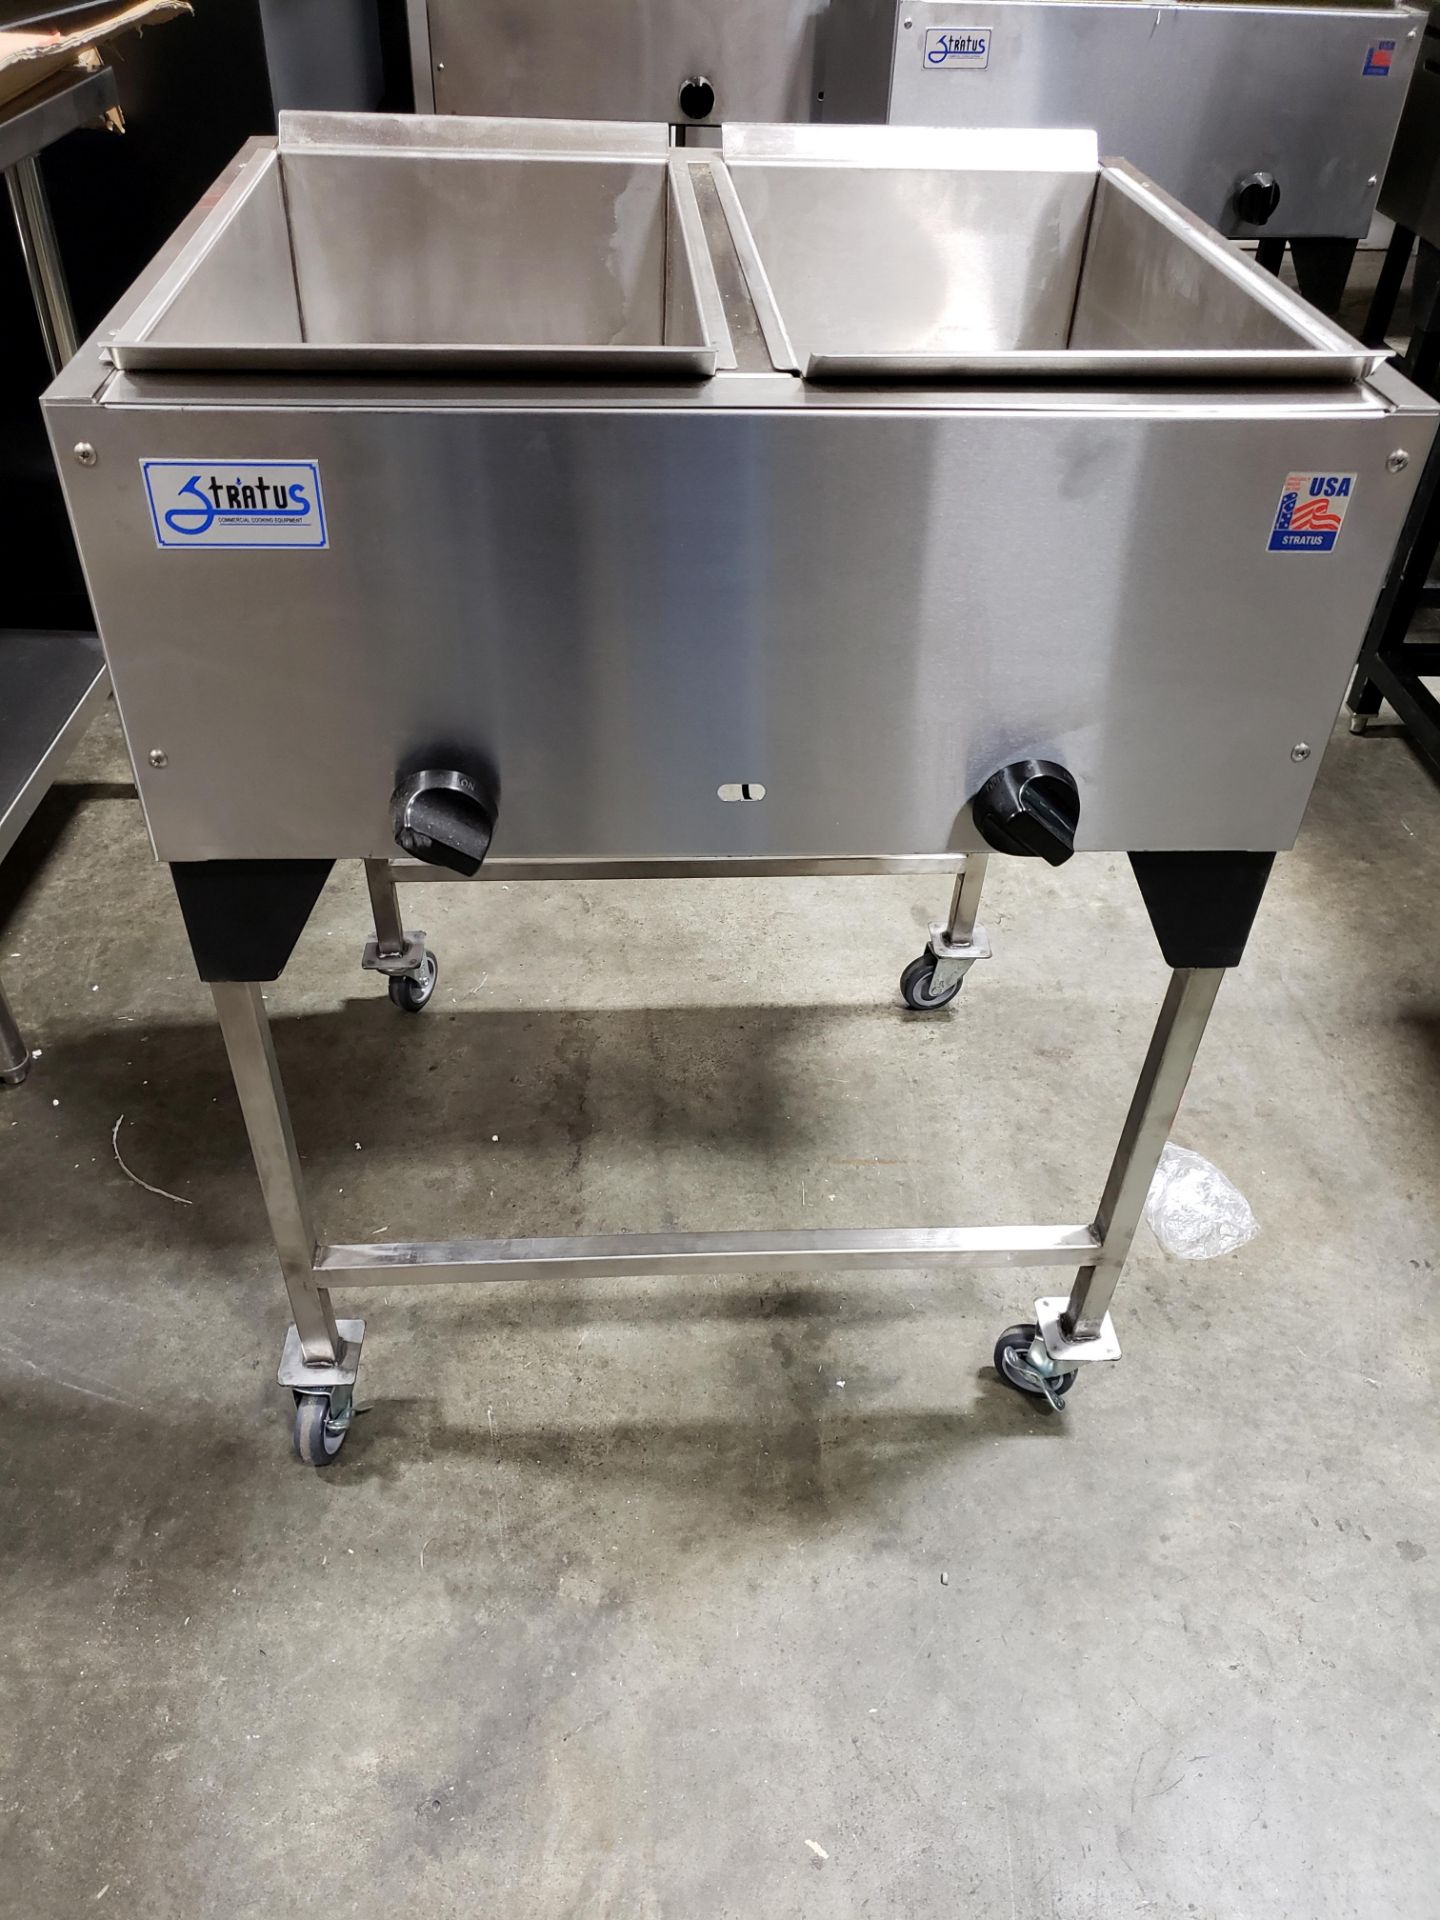 28" Propane 2 Well Steam Table on Casters - Model SST-28-2-S - CSA Certified - Made in USA